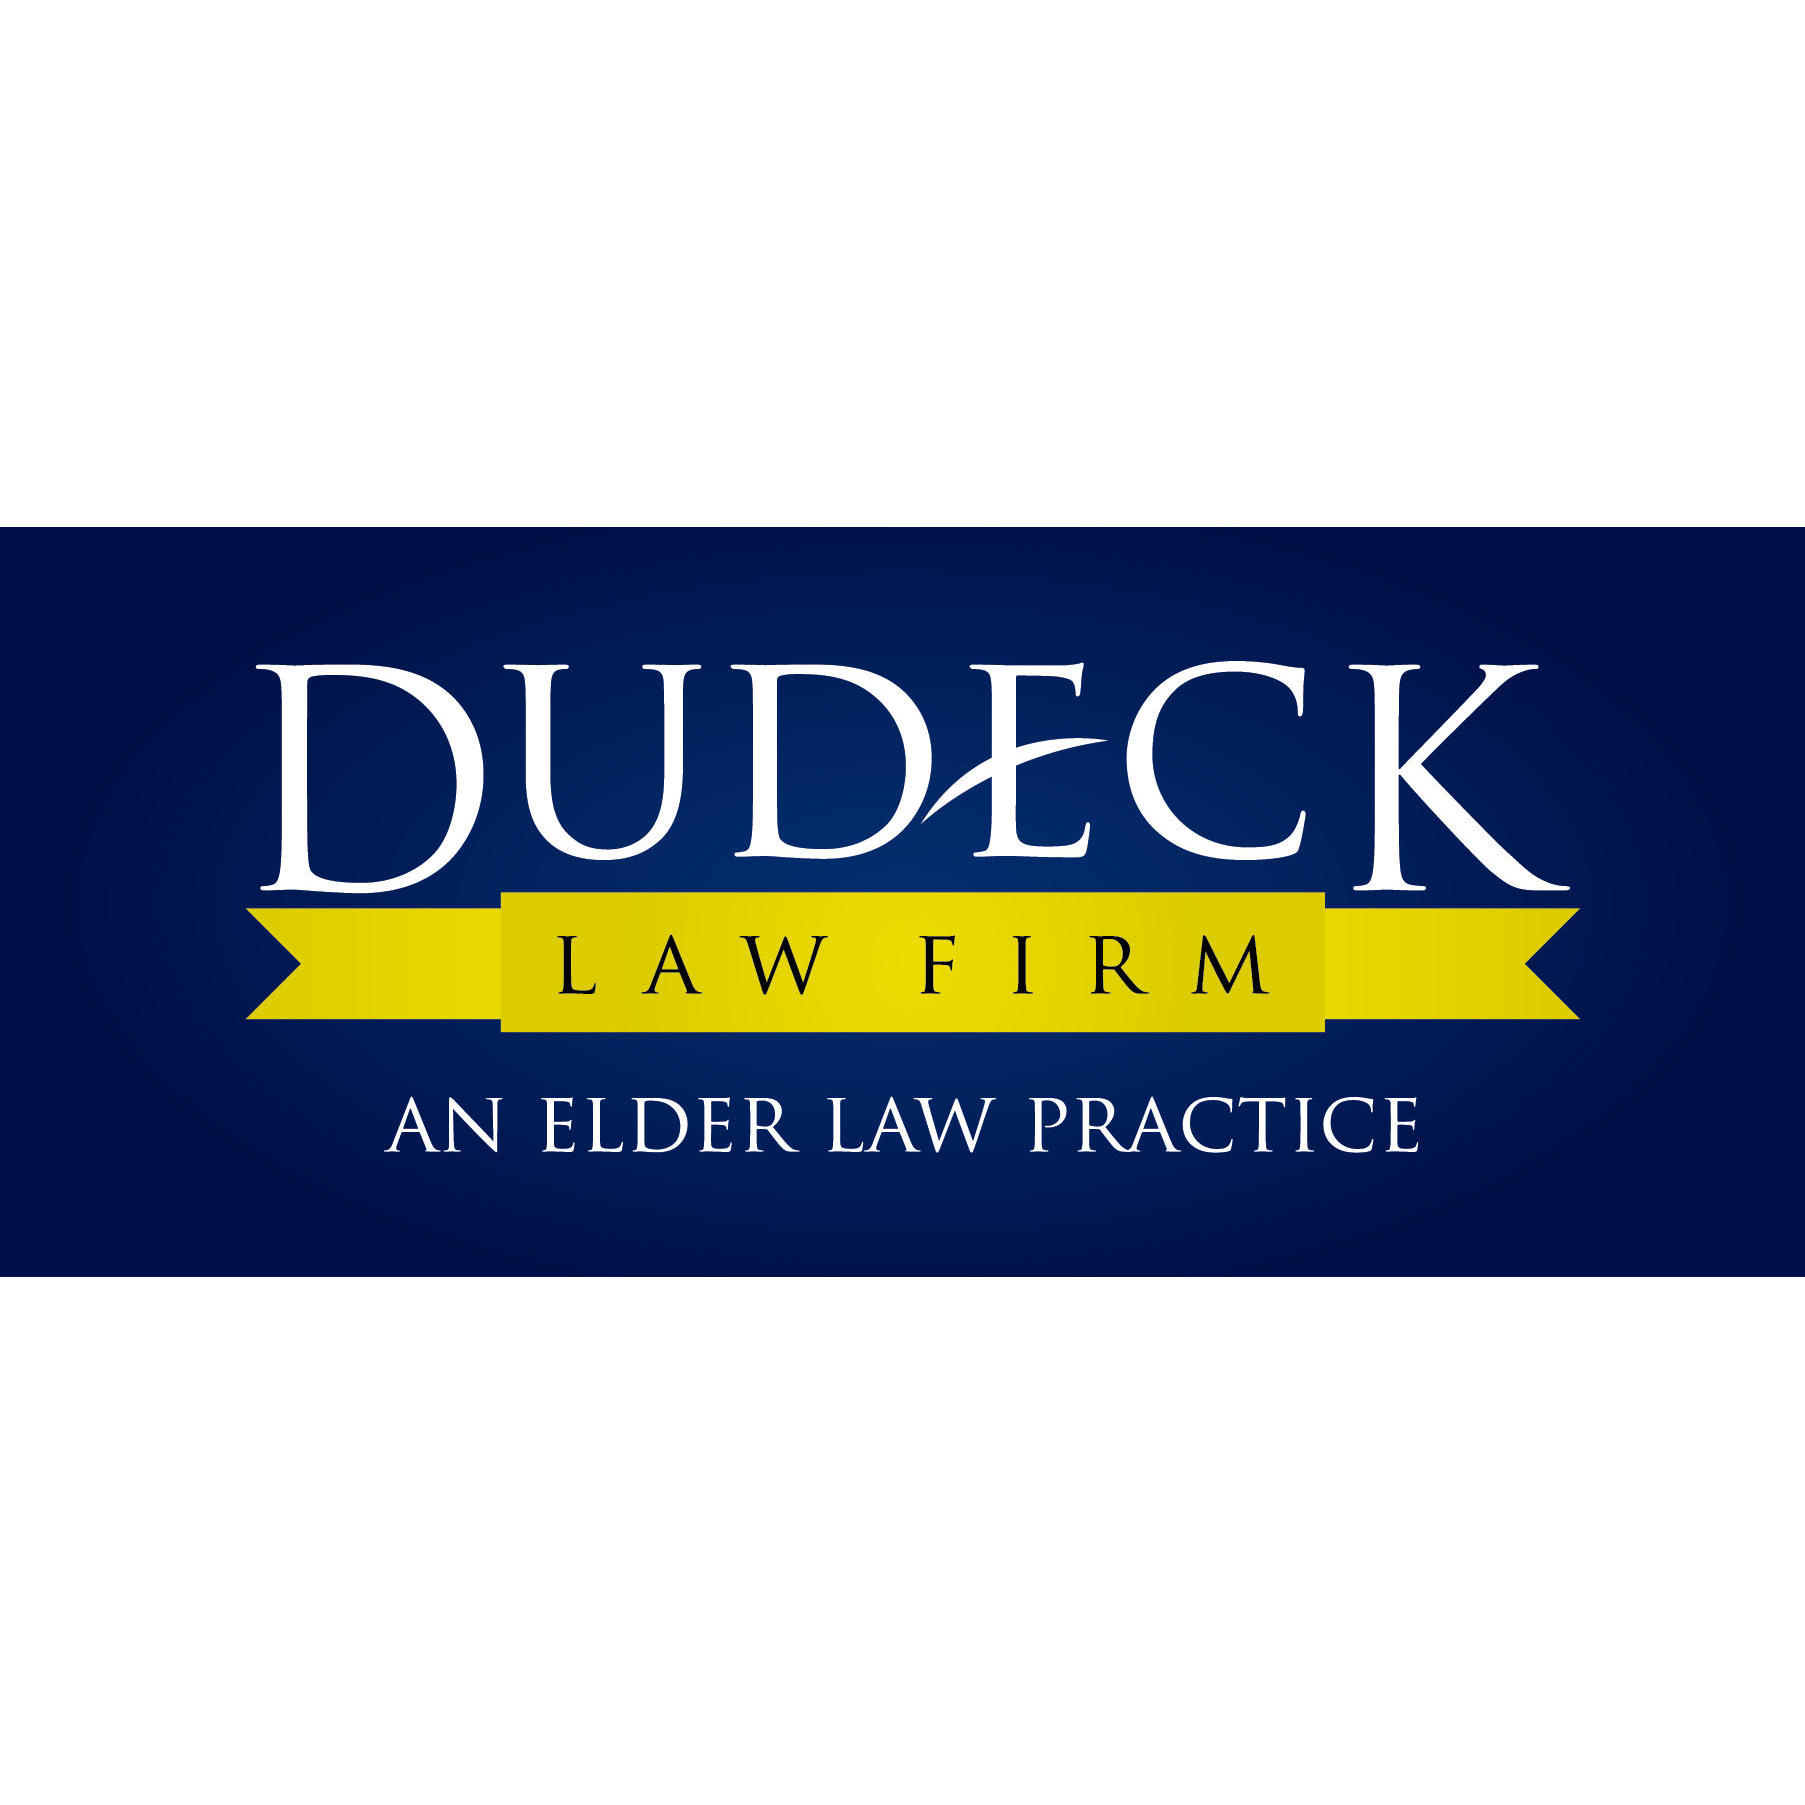 Dudeck Law Firm